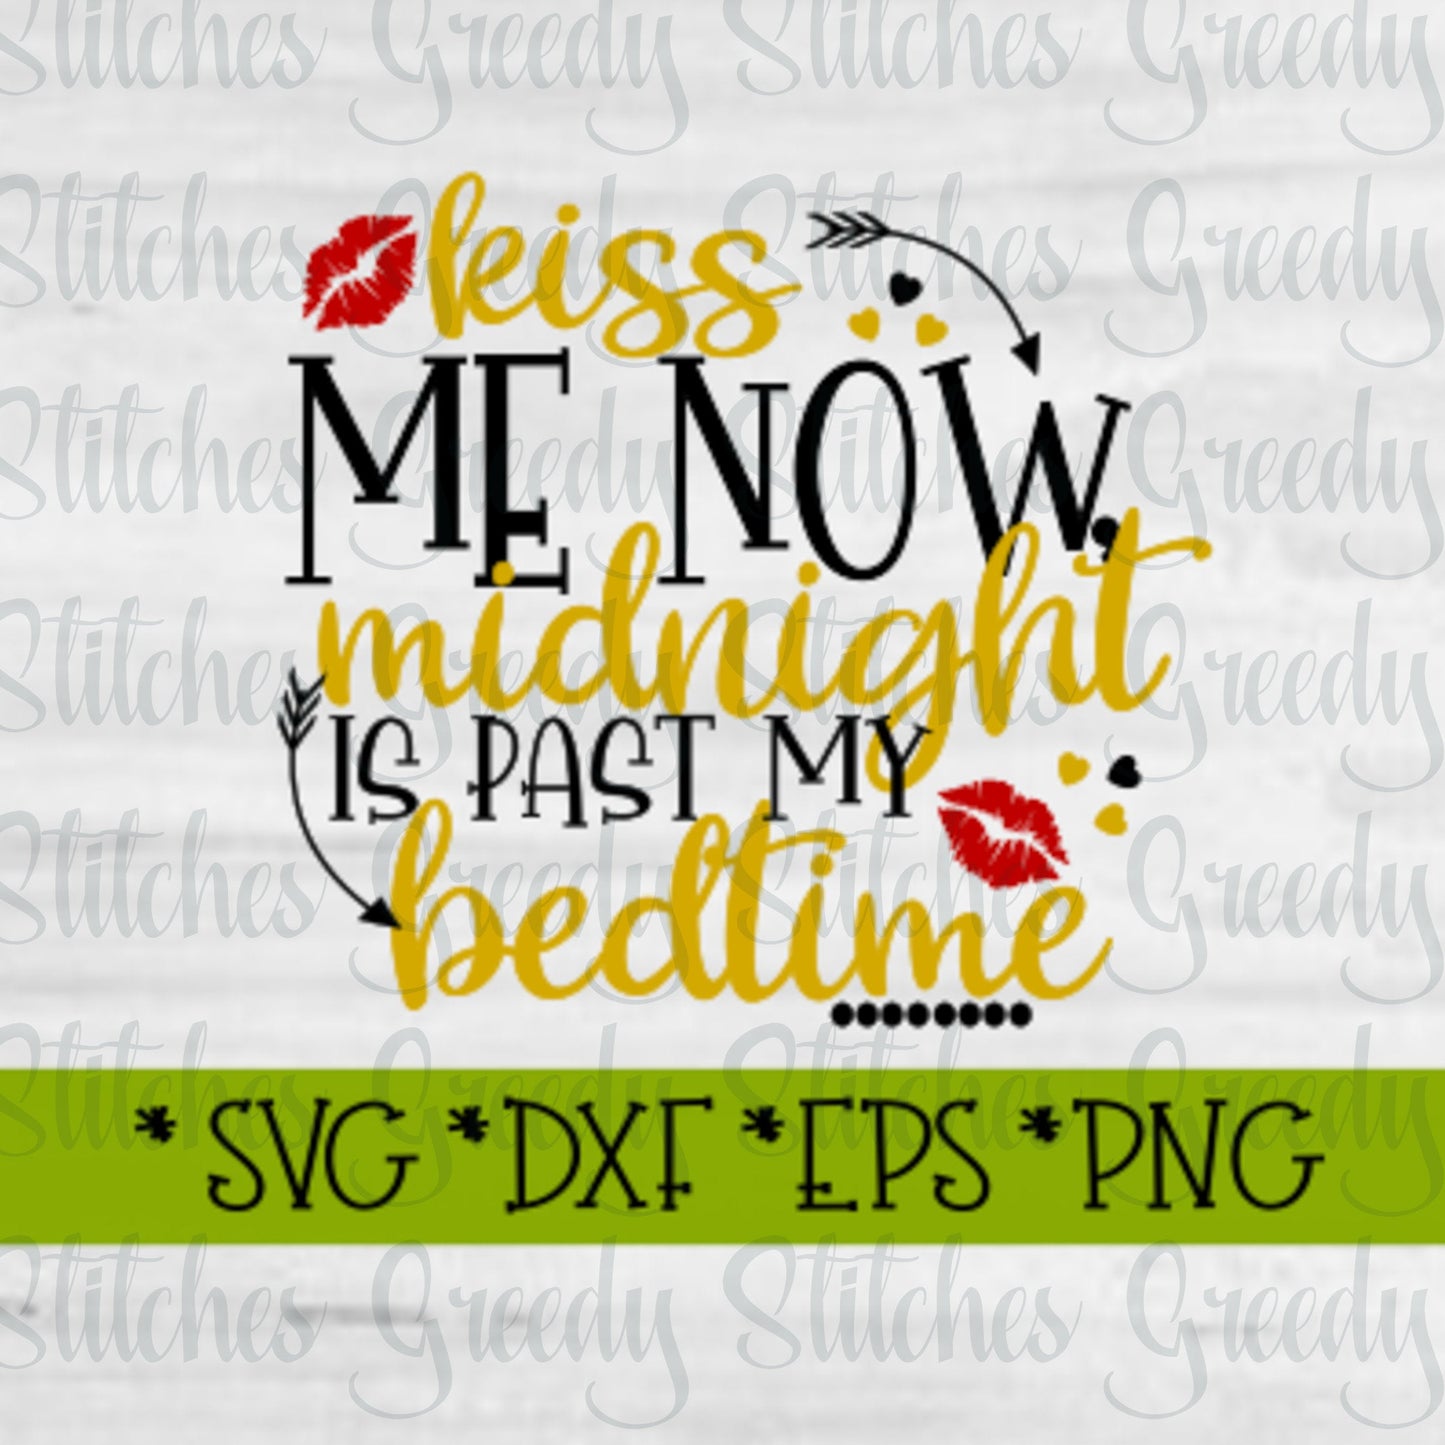 New Years SvG | Kiss Me Now Midnight Is Past My Bedtime svg, dxf, eps, png | New Year SvG | Happy New Year DXF | Instant Download Cut Files